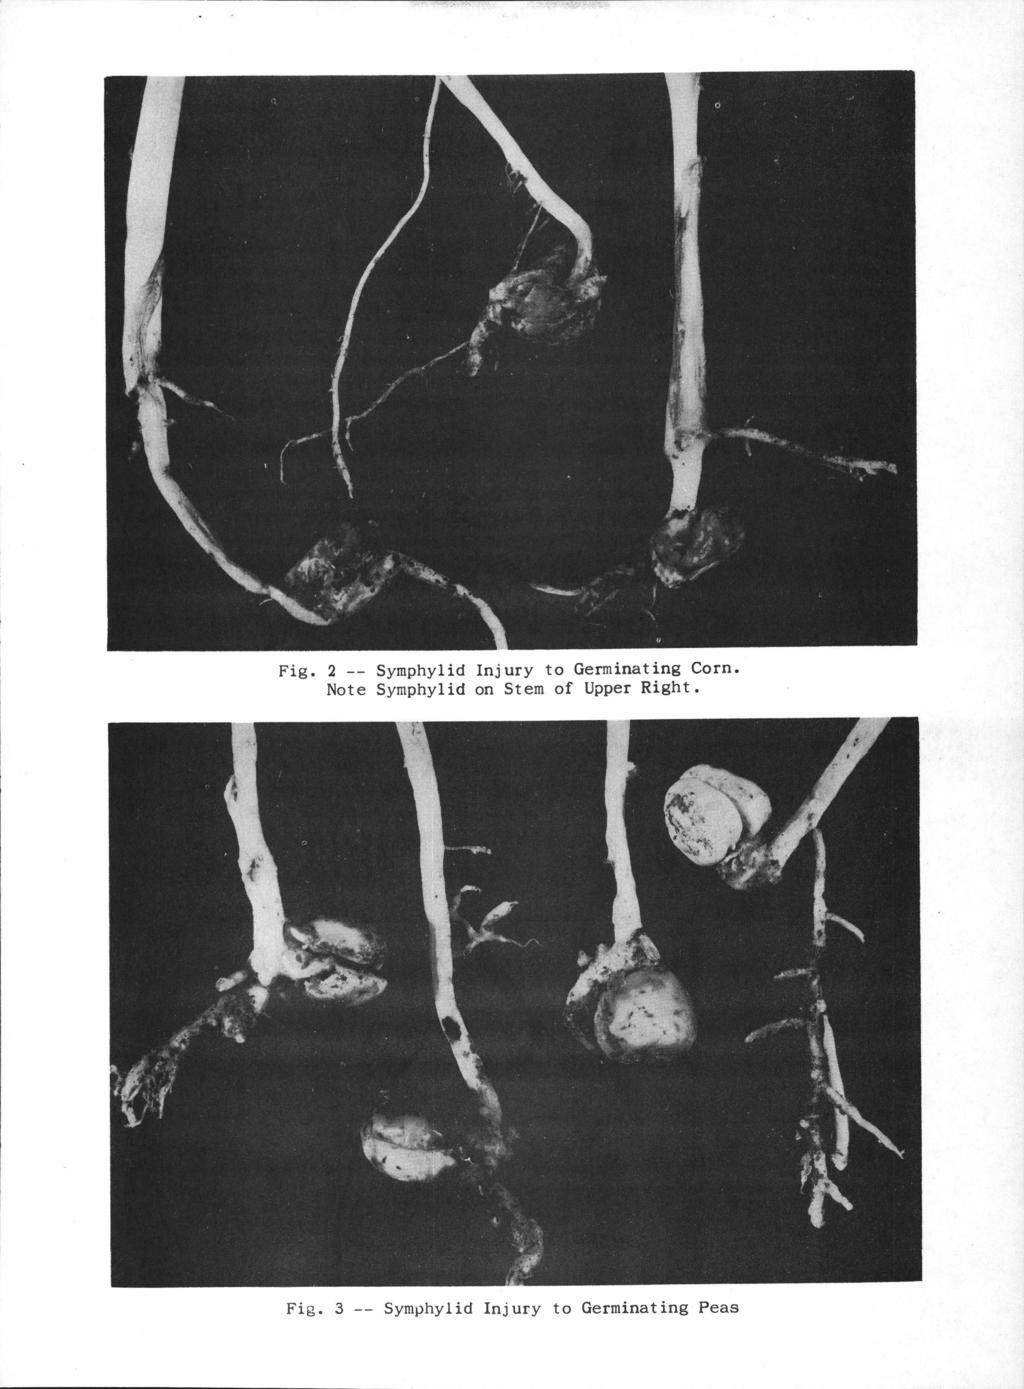 Fig. 2 -- Symphylid Injury to Germinating Corn.